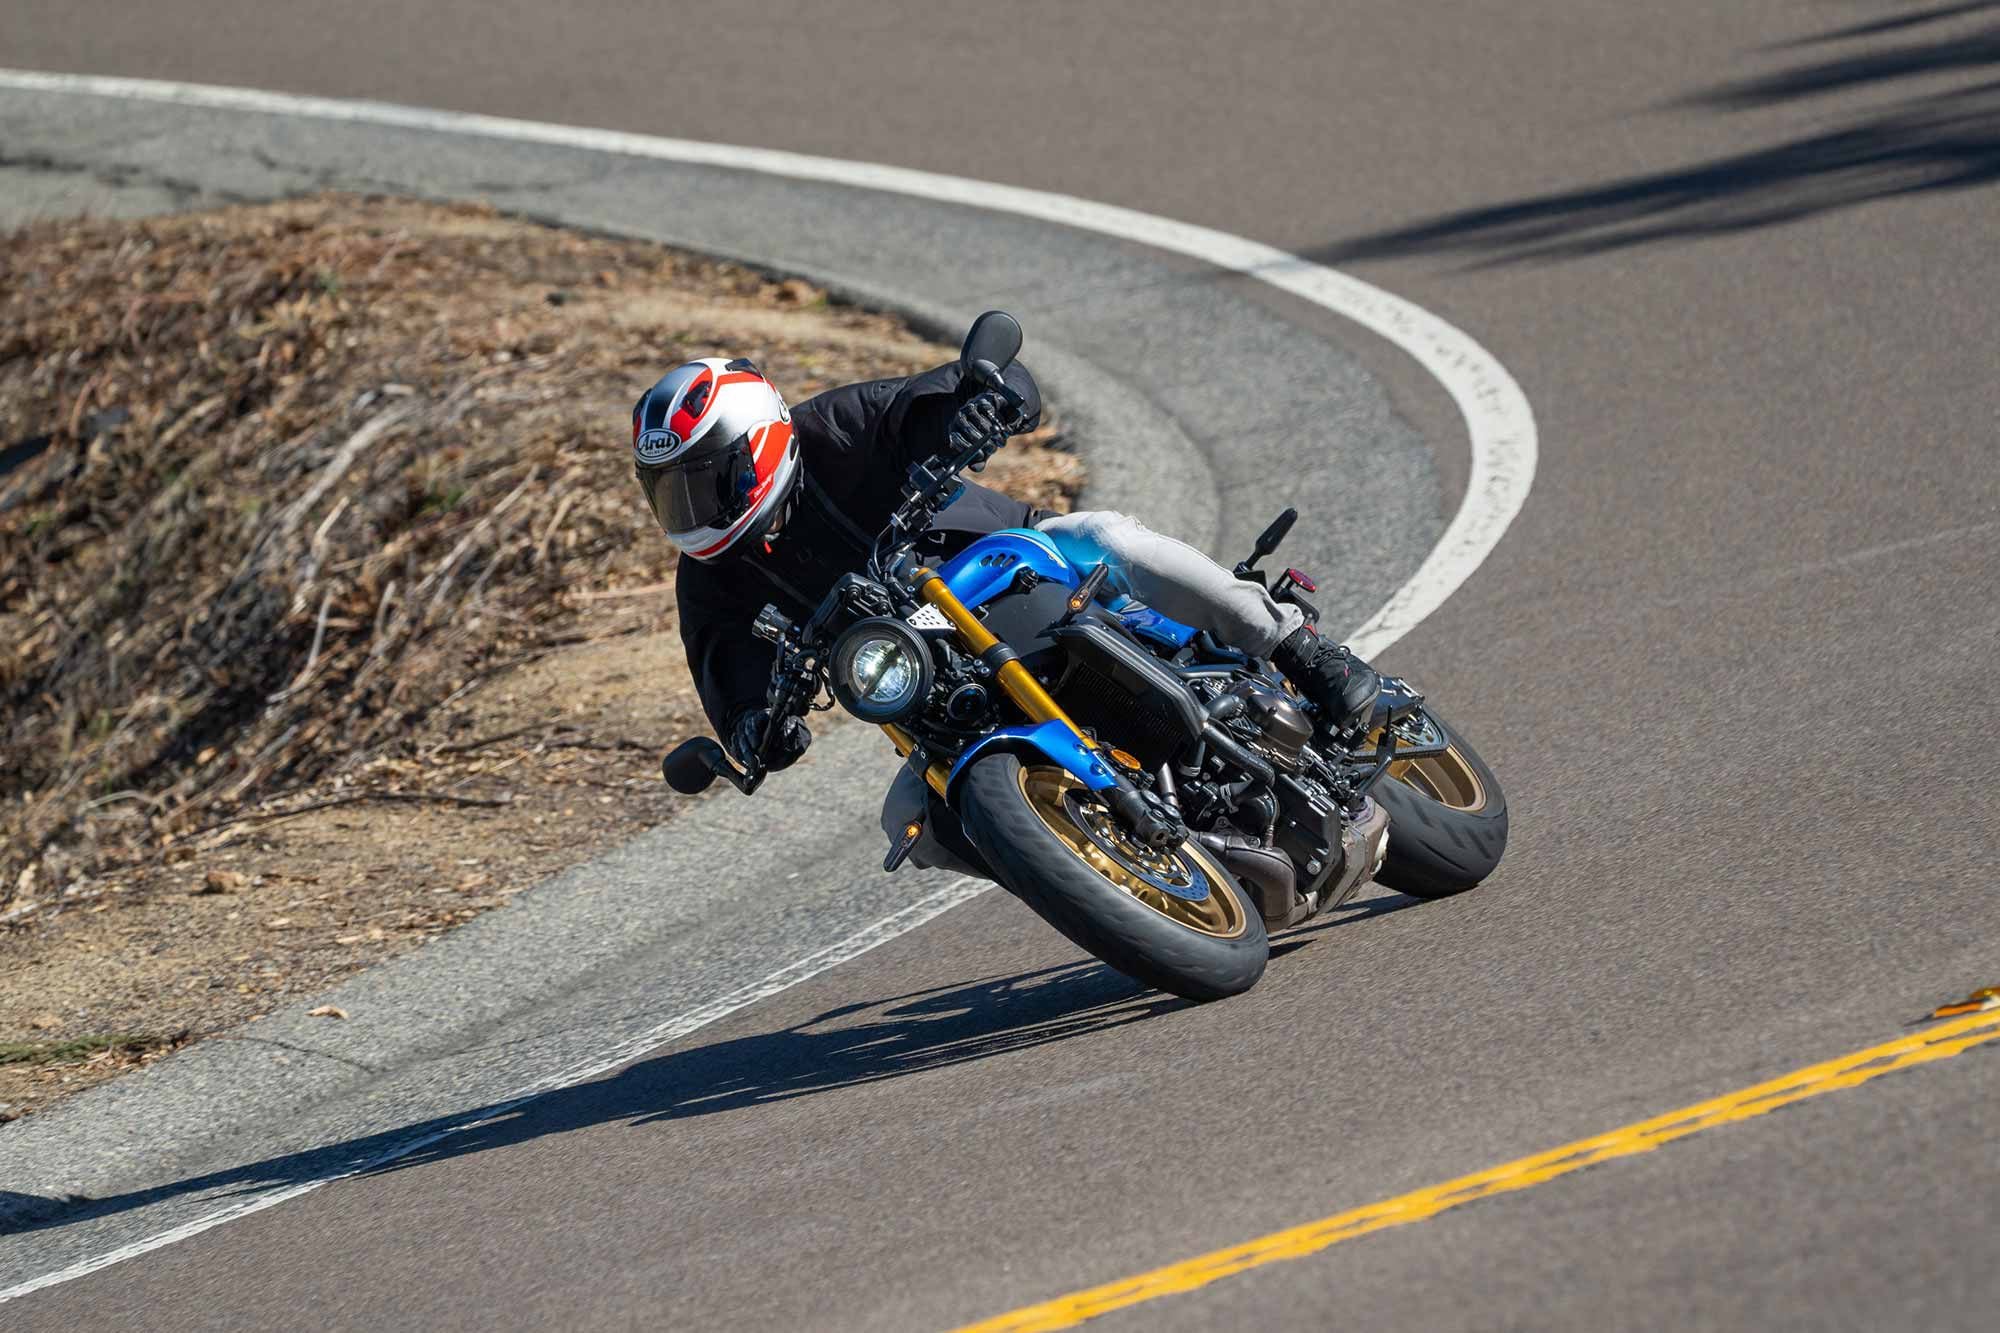 In spite of its longer wheelbase, the 425-pound XSR still offers a high degree of agility.